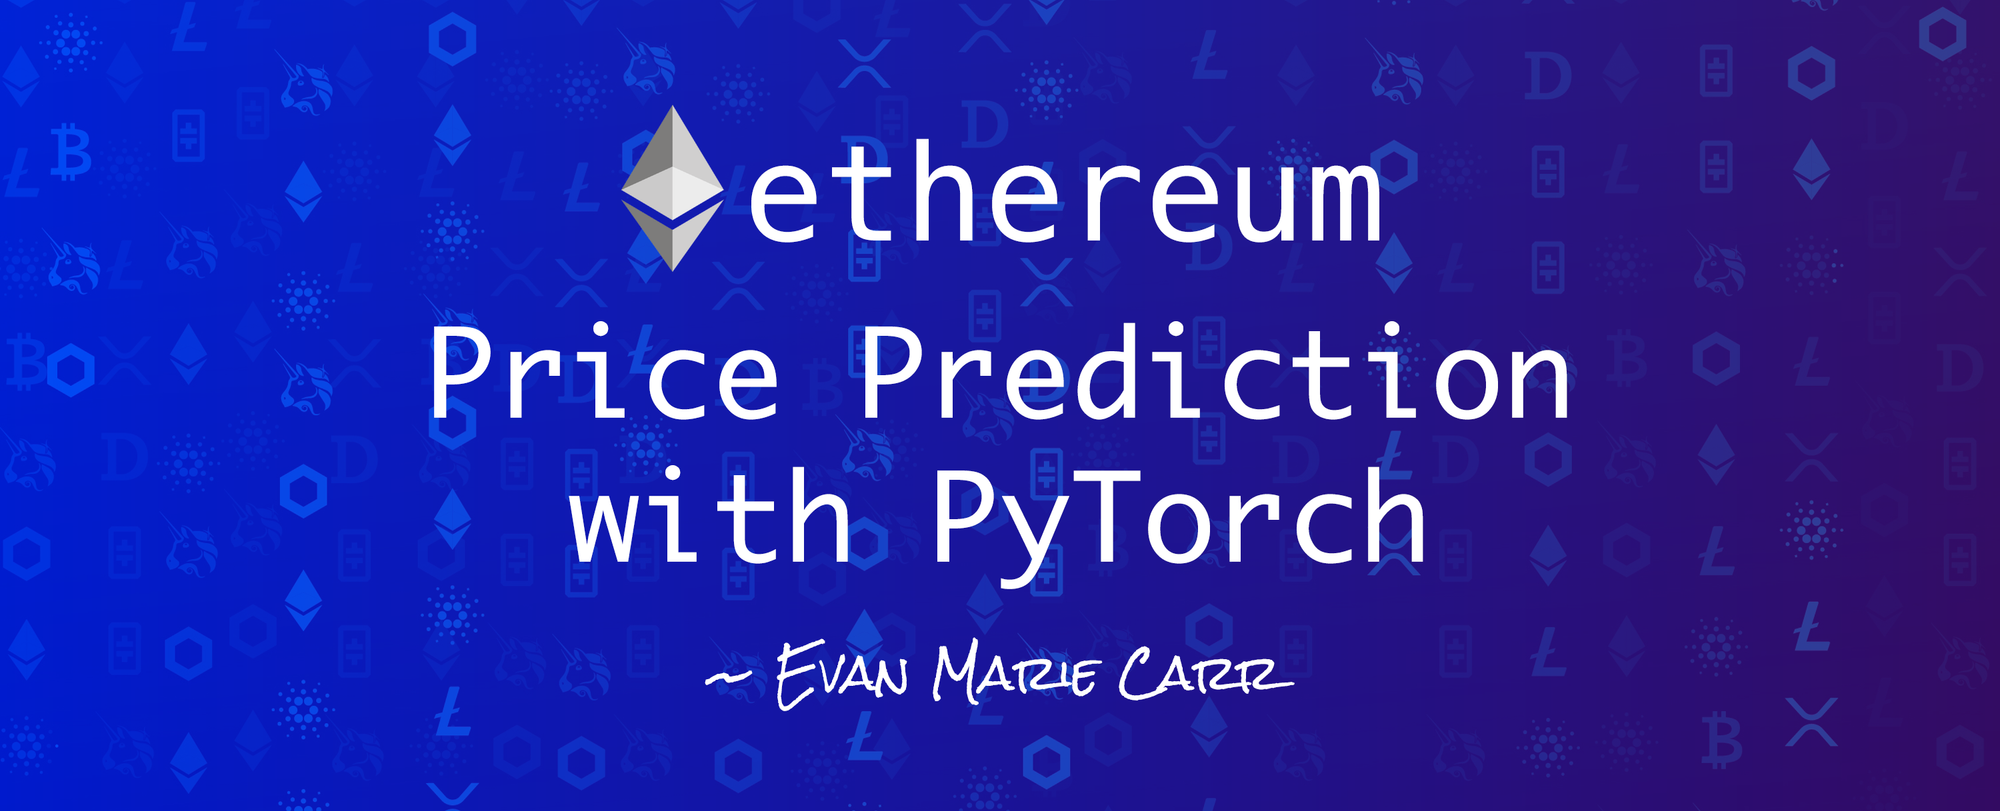 ◮ Ethereum Price Prediction with LSTM